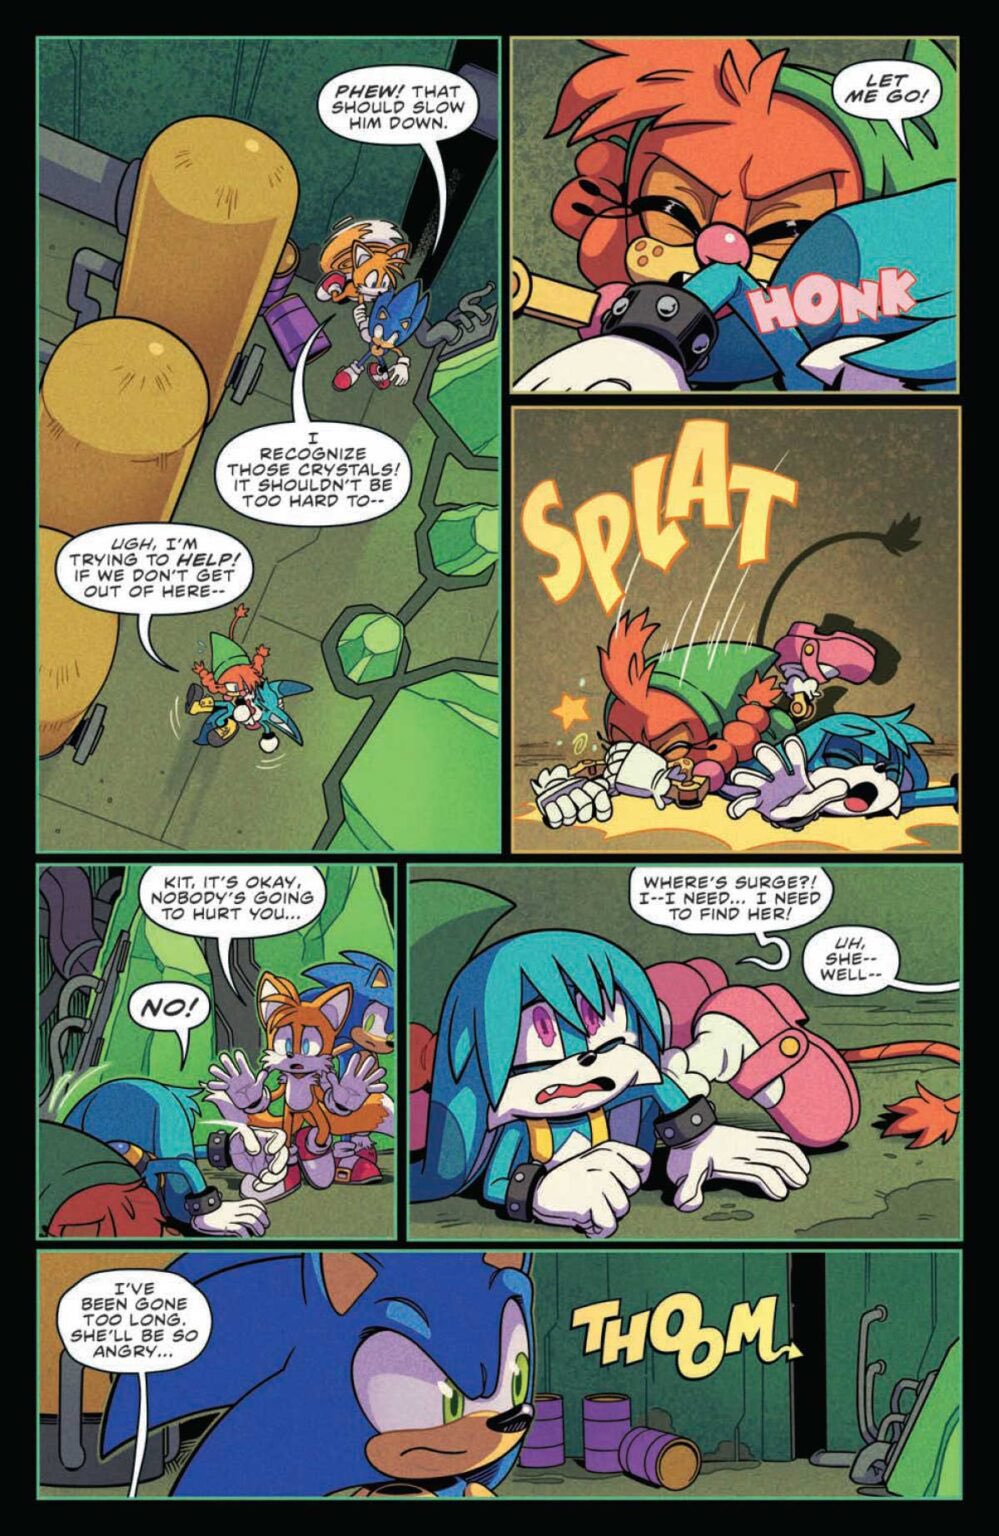 IDW Sonic the Hedgehog Issue 52, Wiki Sonic IDW News